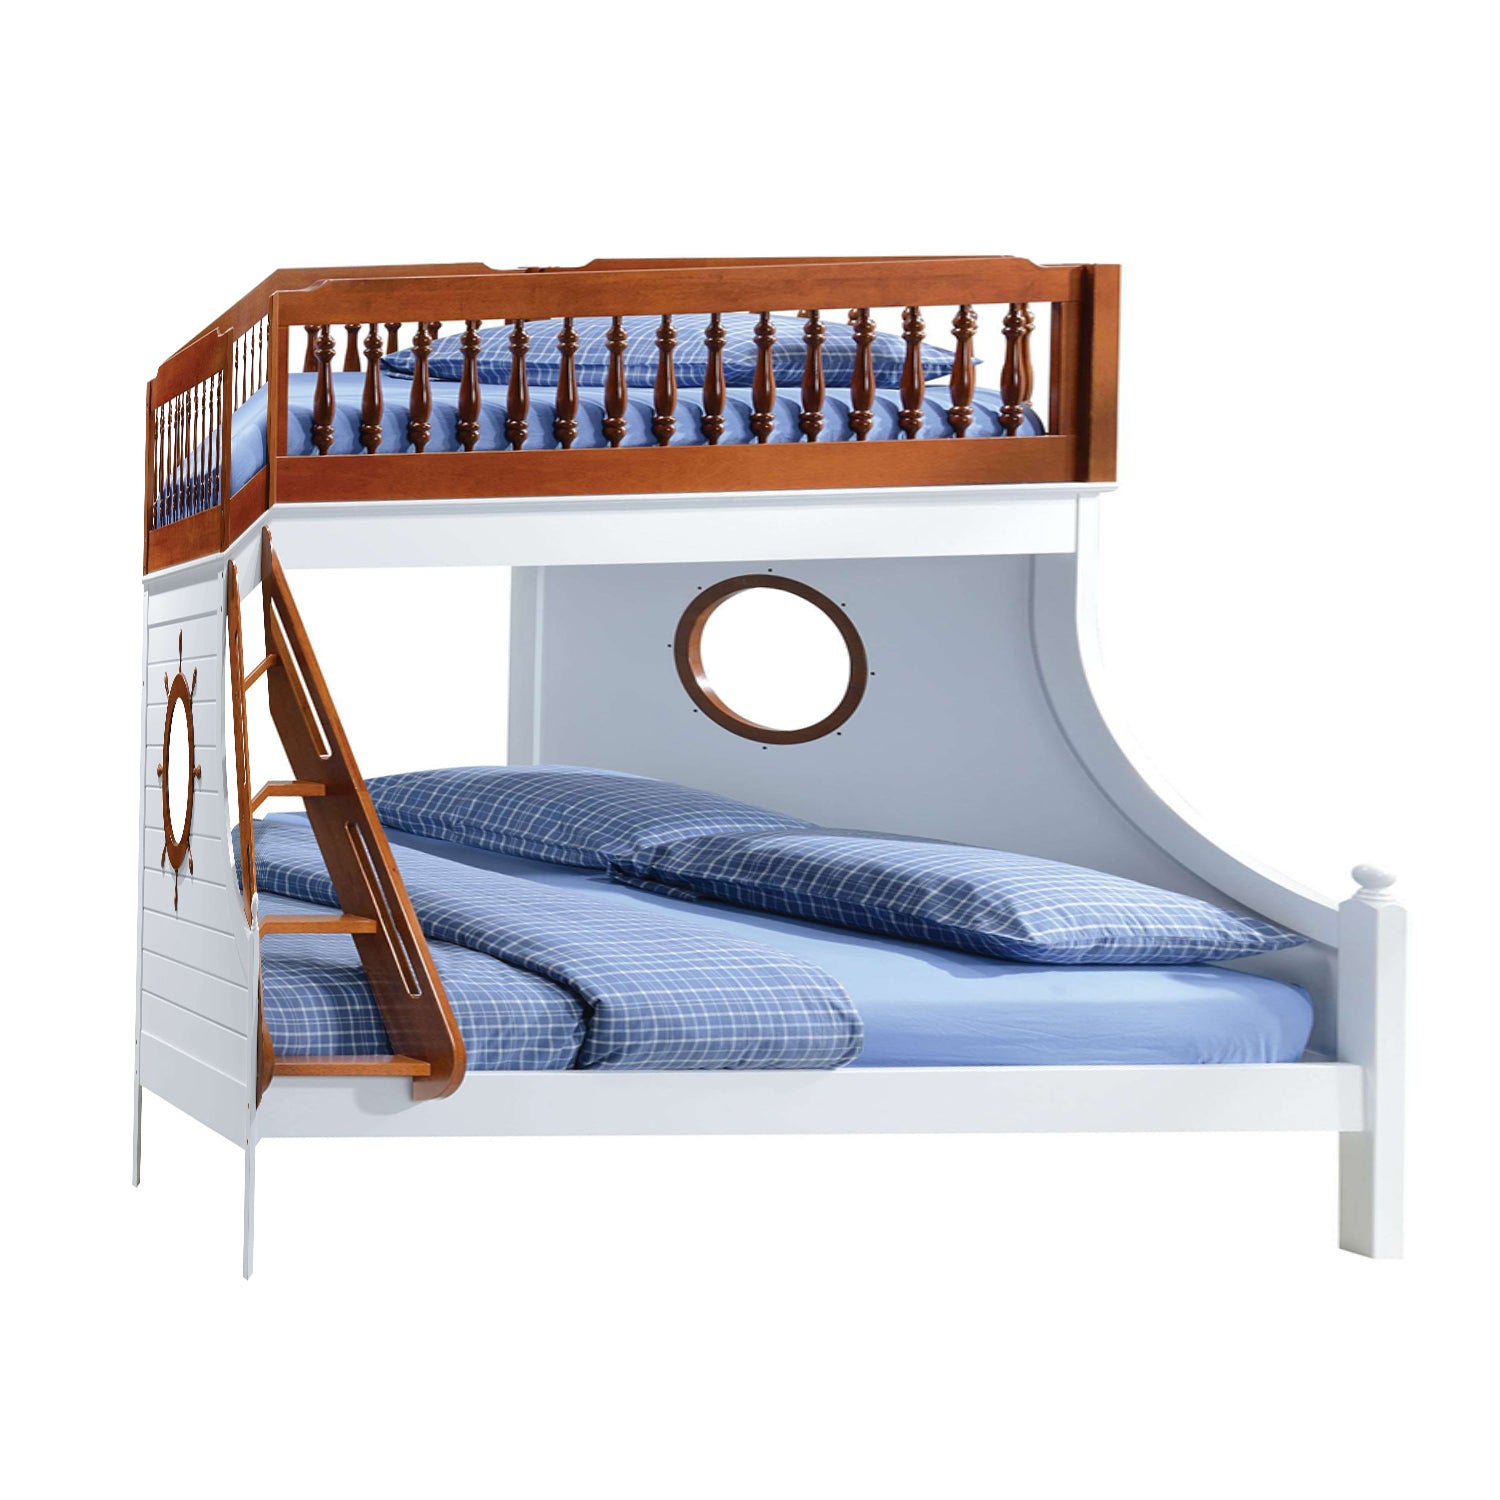 80" X 58" X 69" Twin Over Full Oak And White Bunk Bed Default Title